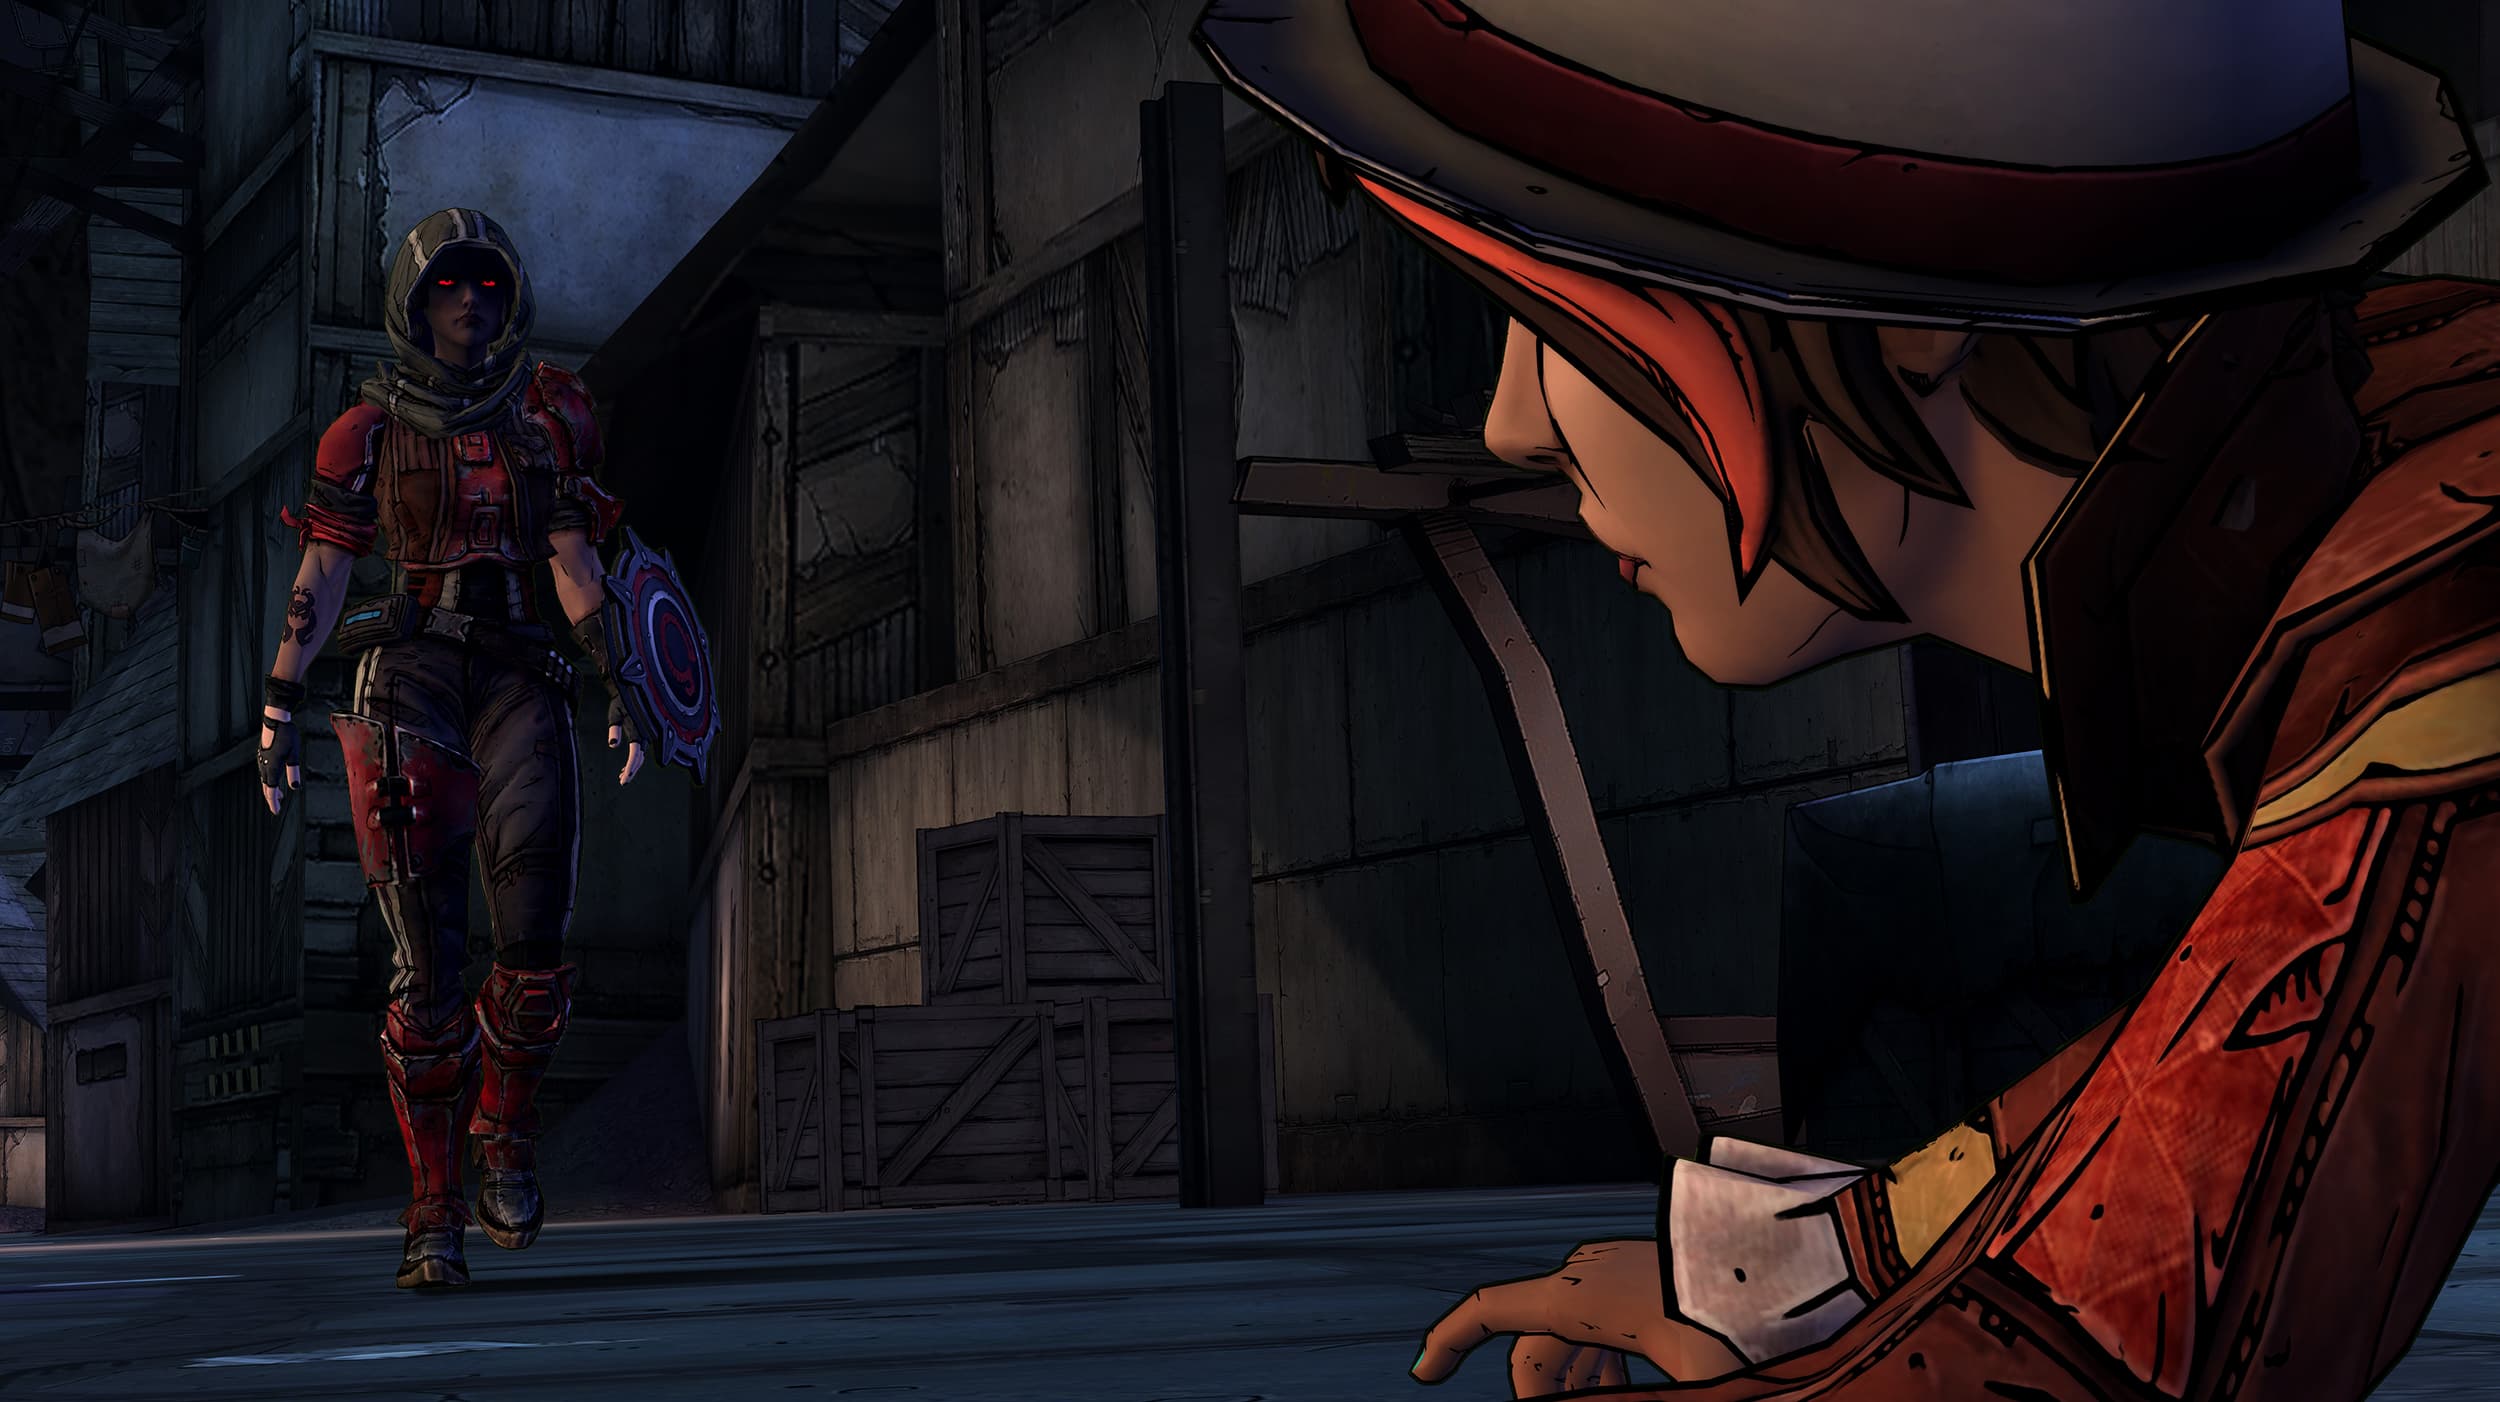 Tales from the Borderlands : Episode 2 - Atlas Mugged Xbox One